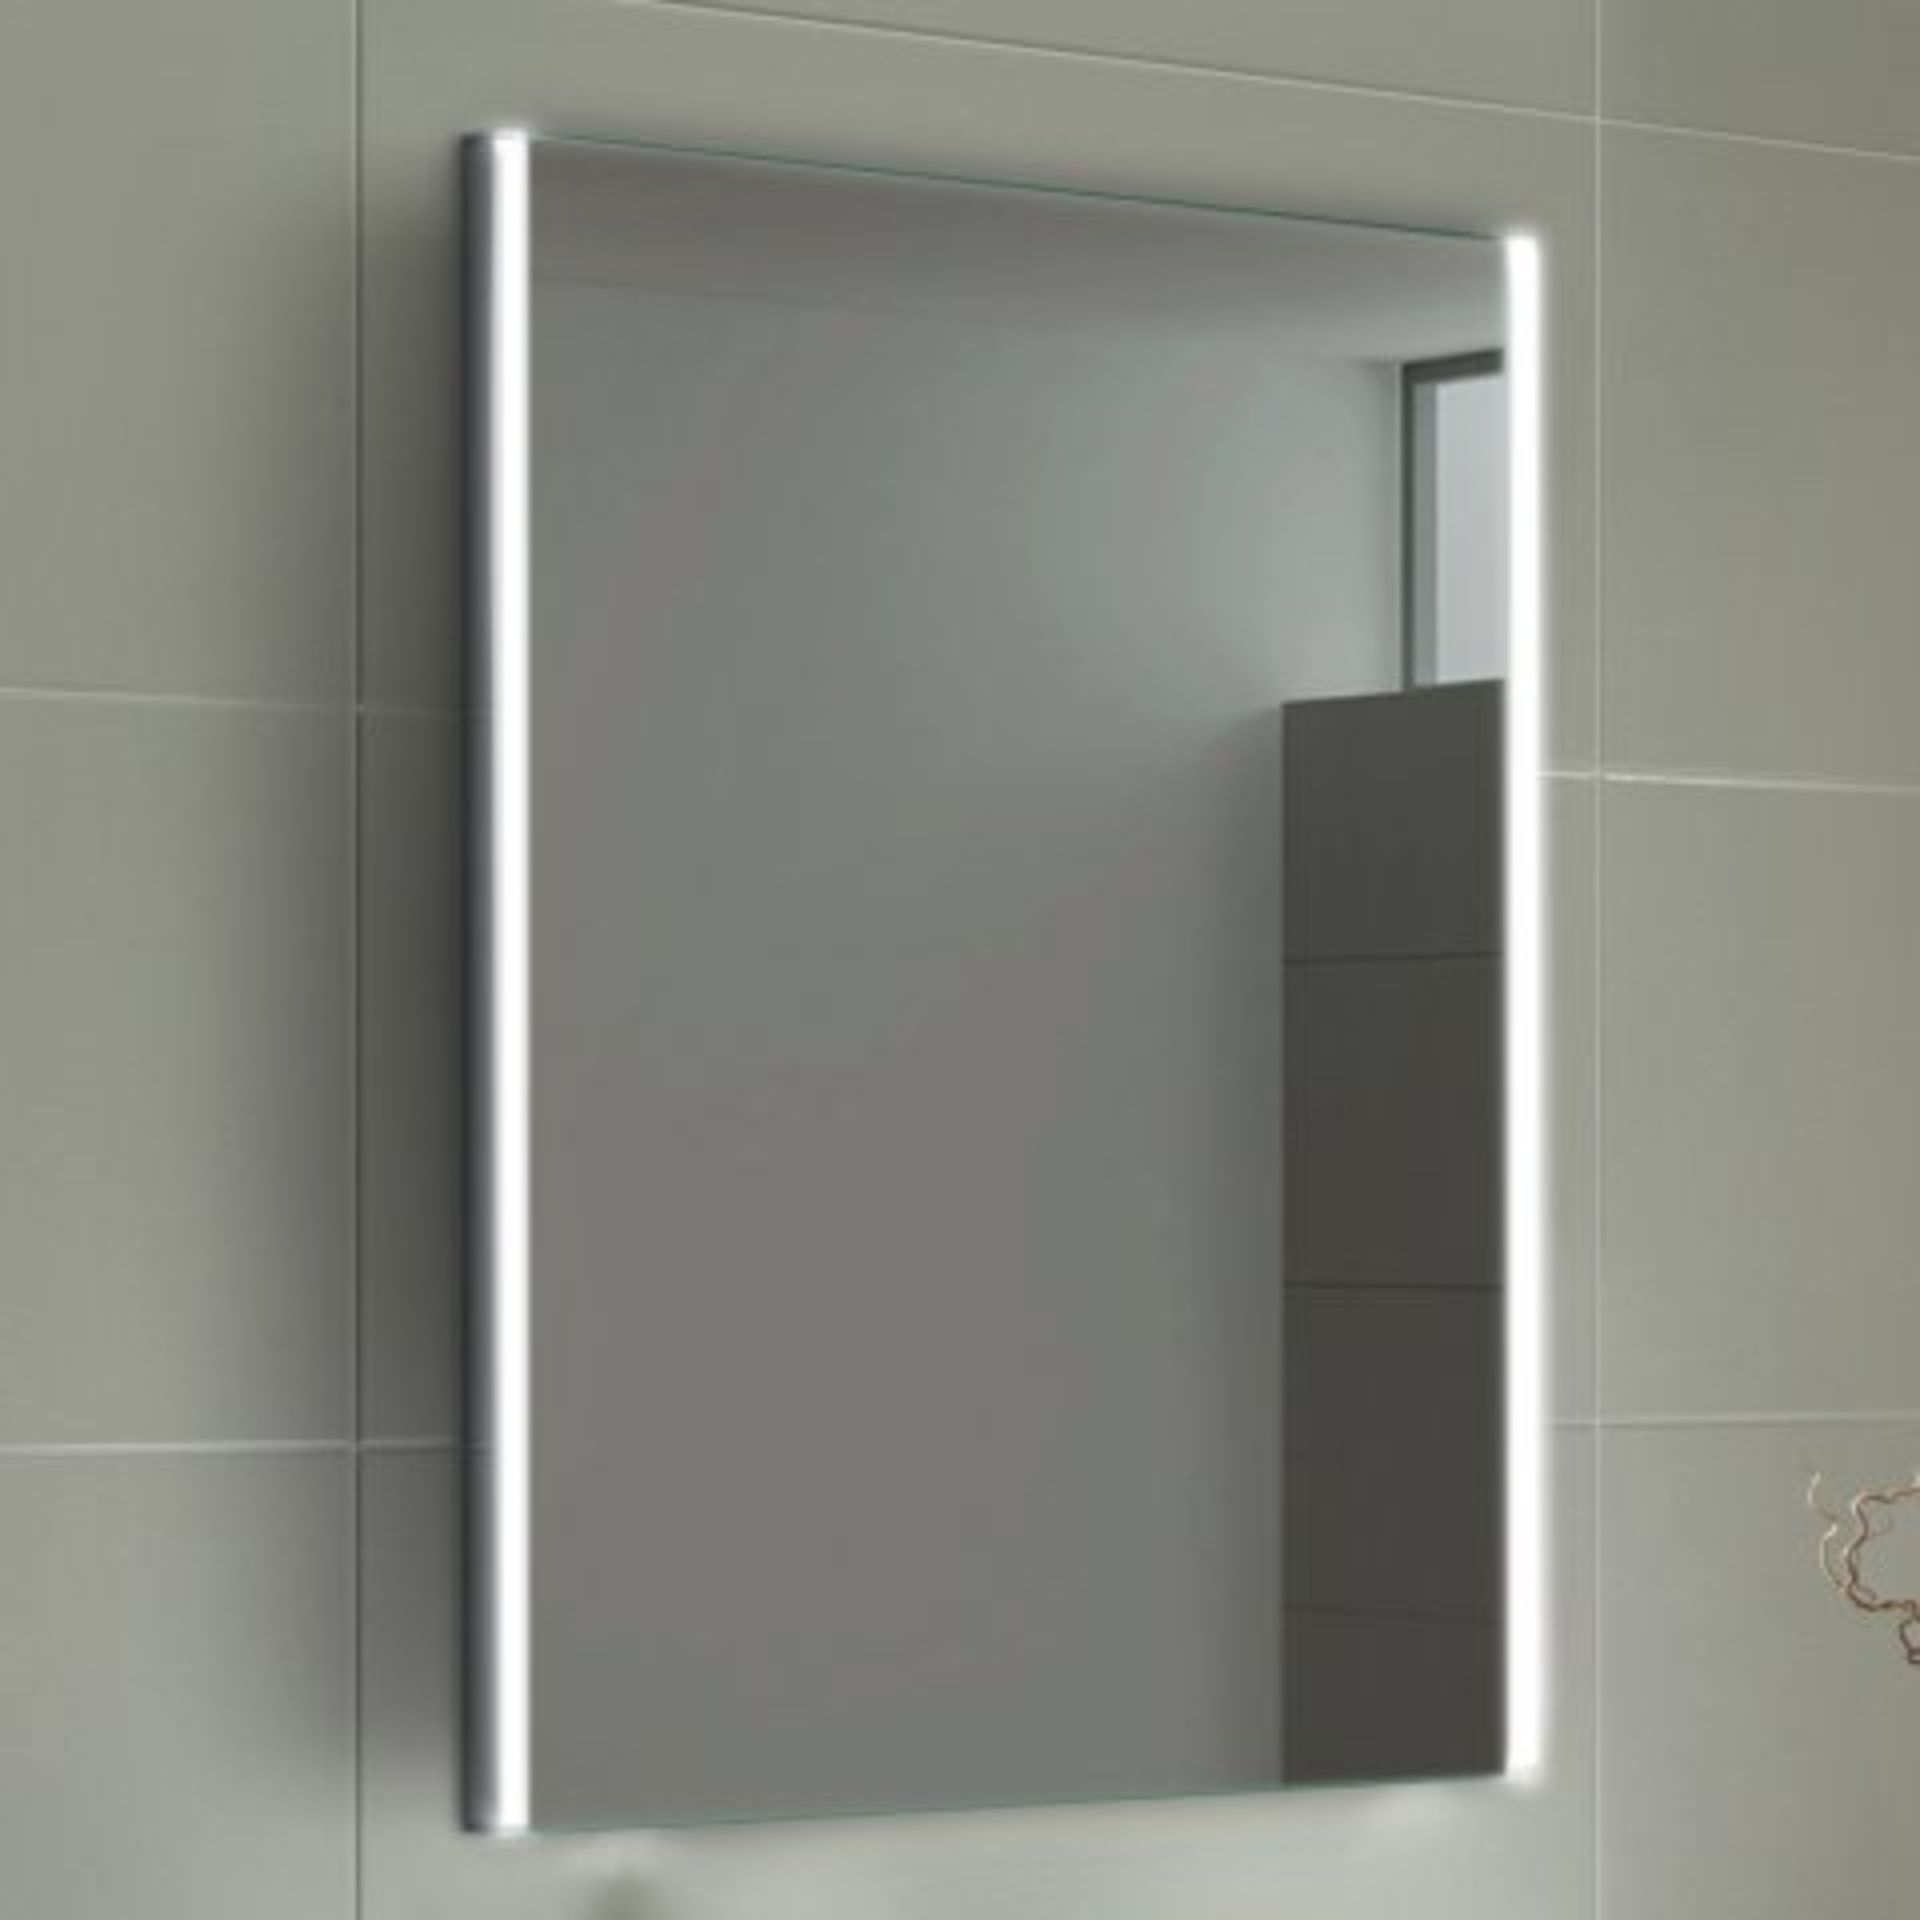 (L130) 700x500mm Lunar Illuminated LED Mirror RRP £349.99. Our Lunar range of mirrors comprises of